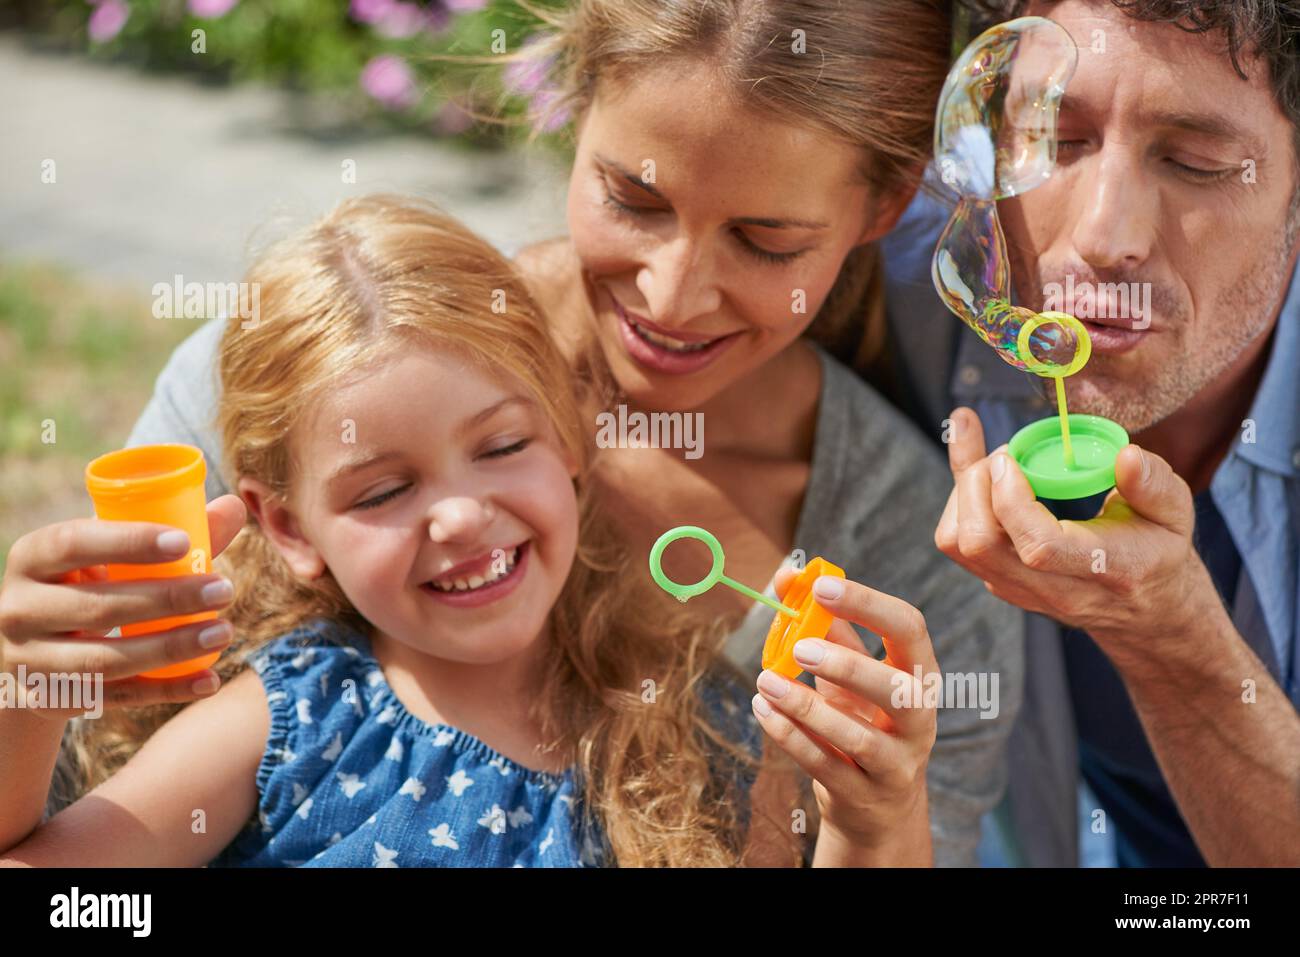 Fun in the sun with them. Shot of a young family blowing bubbles together at home. Stock Photo